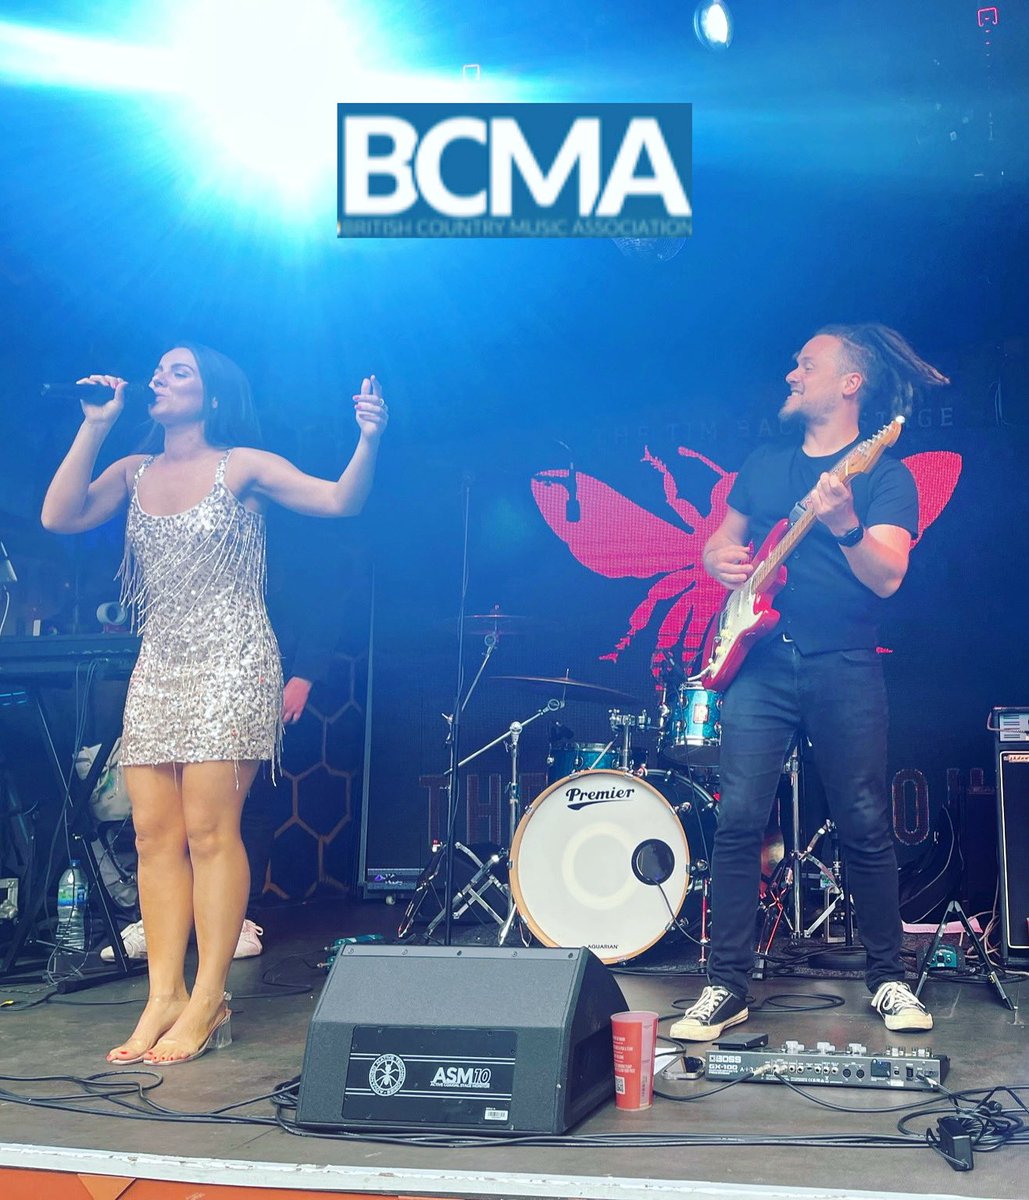 Hey! Please take 2 mins to vote for me for the following categories: - UK Single of the Year (Lisa T ‘The Best Kept Secret’) - UK Female Vocalist - UK Entertainer surveyhero.com/c/jzearxk3 Thank you so much! 🙏🏻 @BritishCMA #bcma